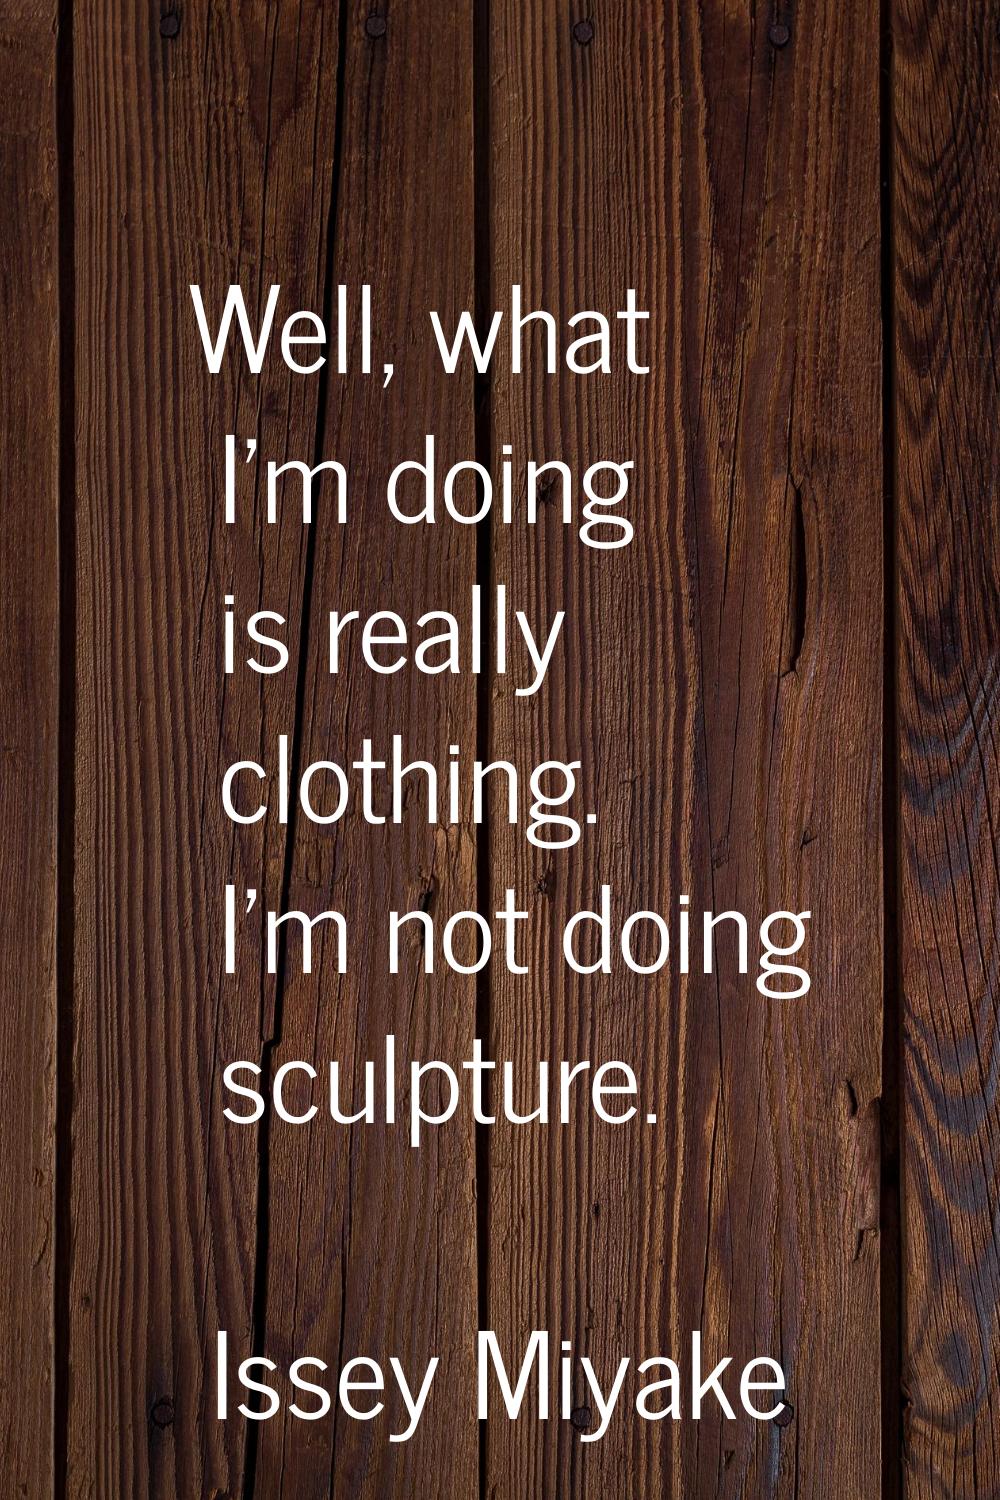 Well, what I'm doing is really clothing. I'm not doing sculpture.